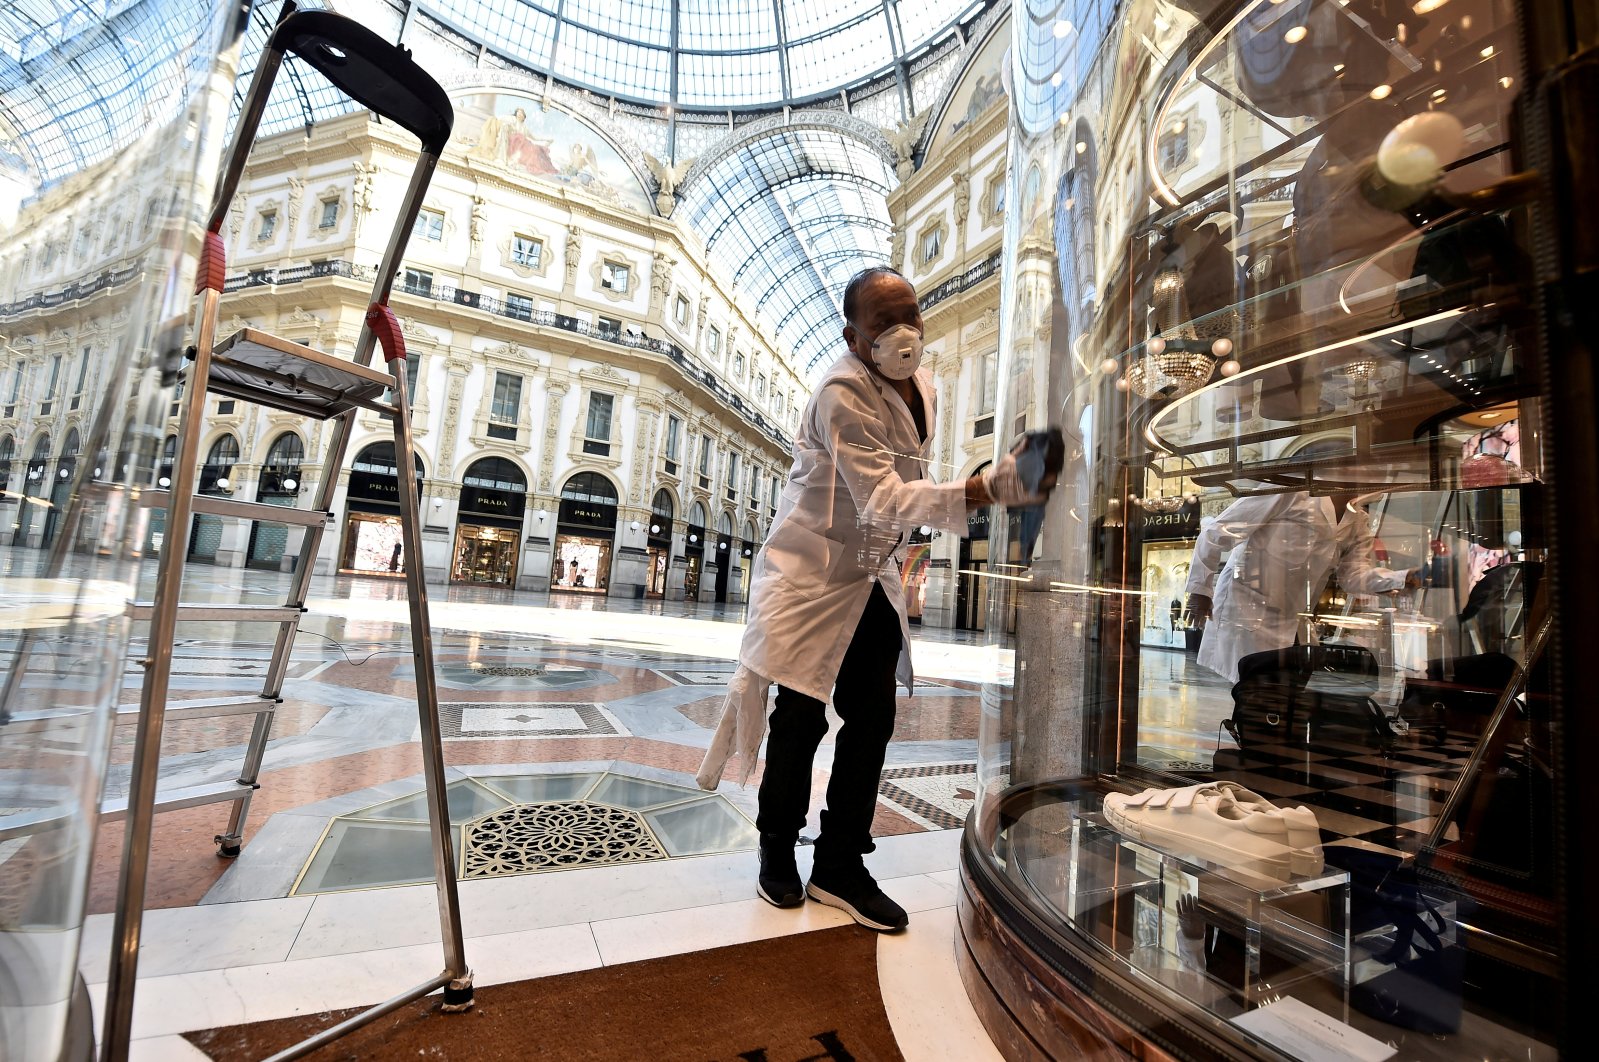 A worker prepares a store on the reopening day at Galleria Vittorio Emanuele II, as Italy eases some of the lockdown measures put in place during the coronavirus outbreak, in Milan, Italy, May 18, 2020. (Reuters Photo)